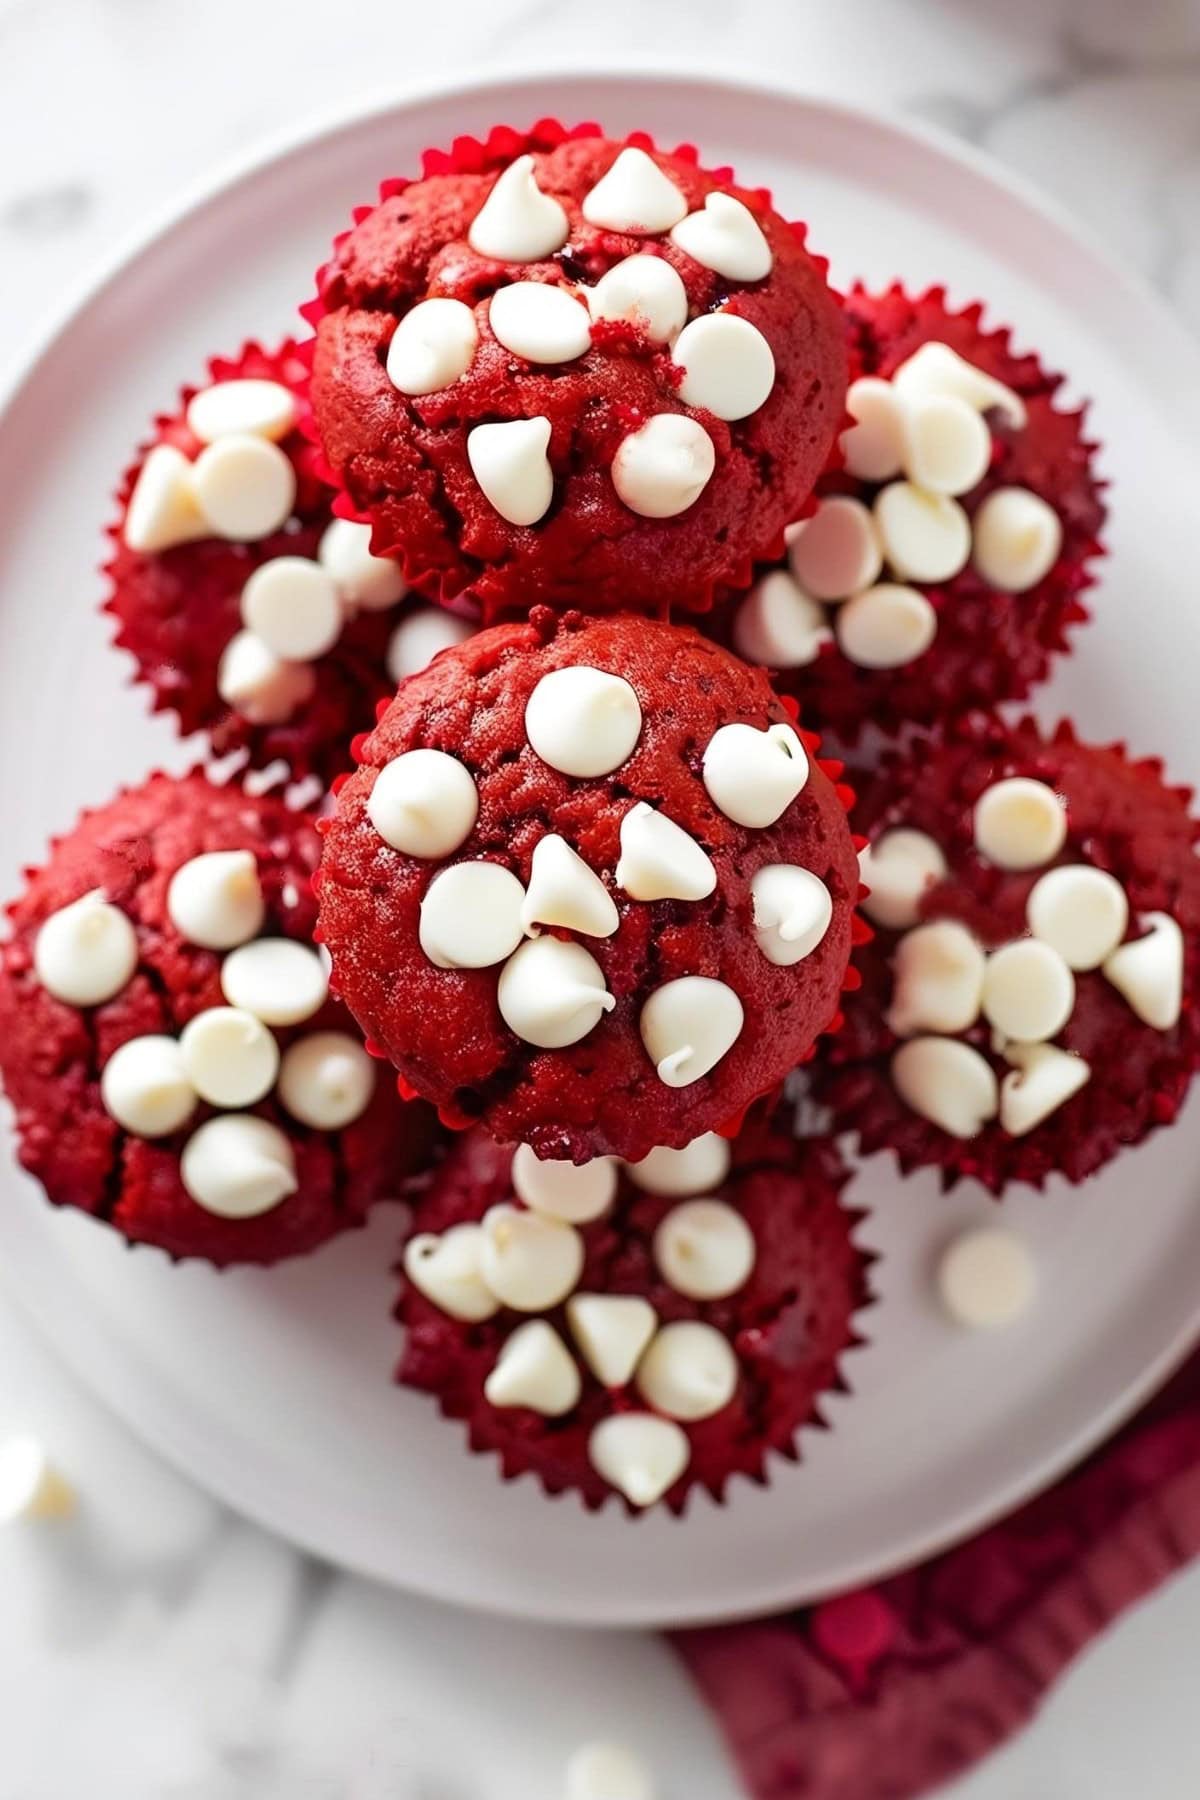 Top view of red velvet muffins with white chocolate chips arranged on a white plate.